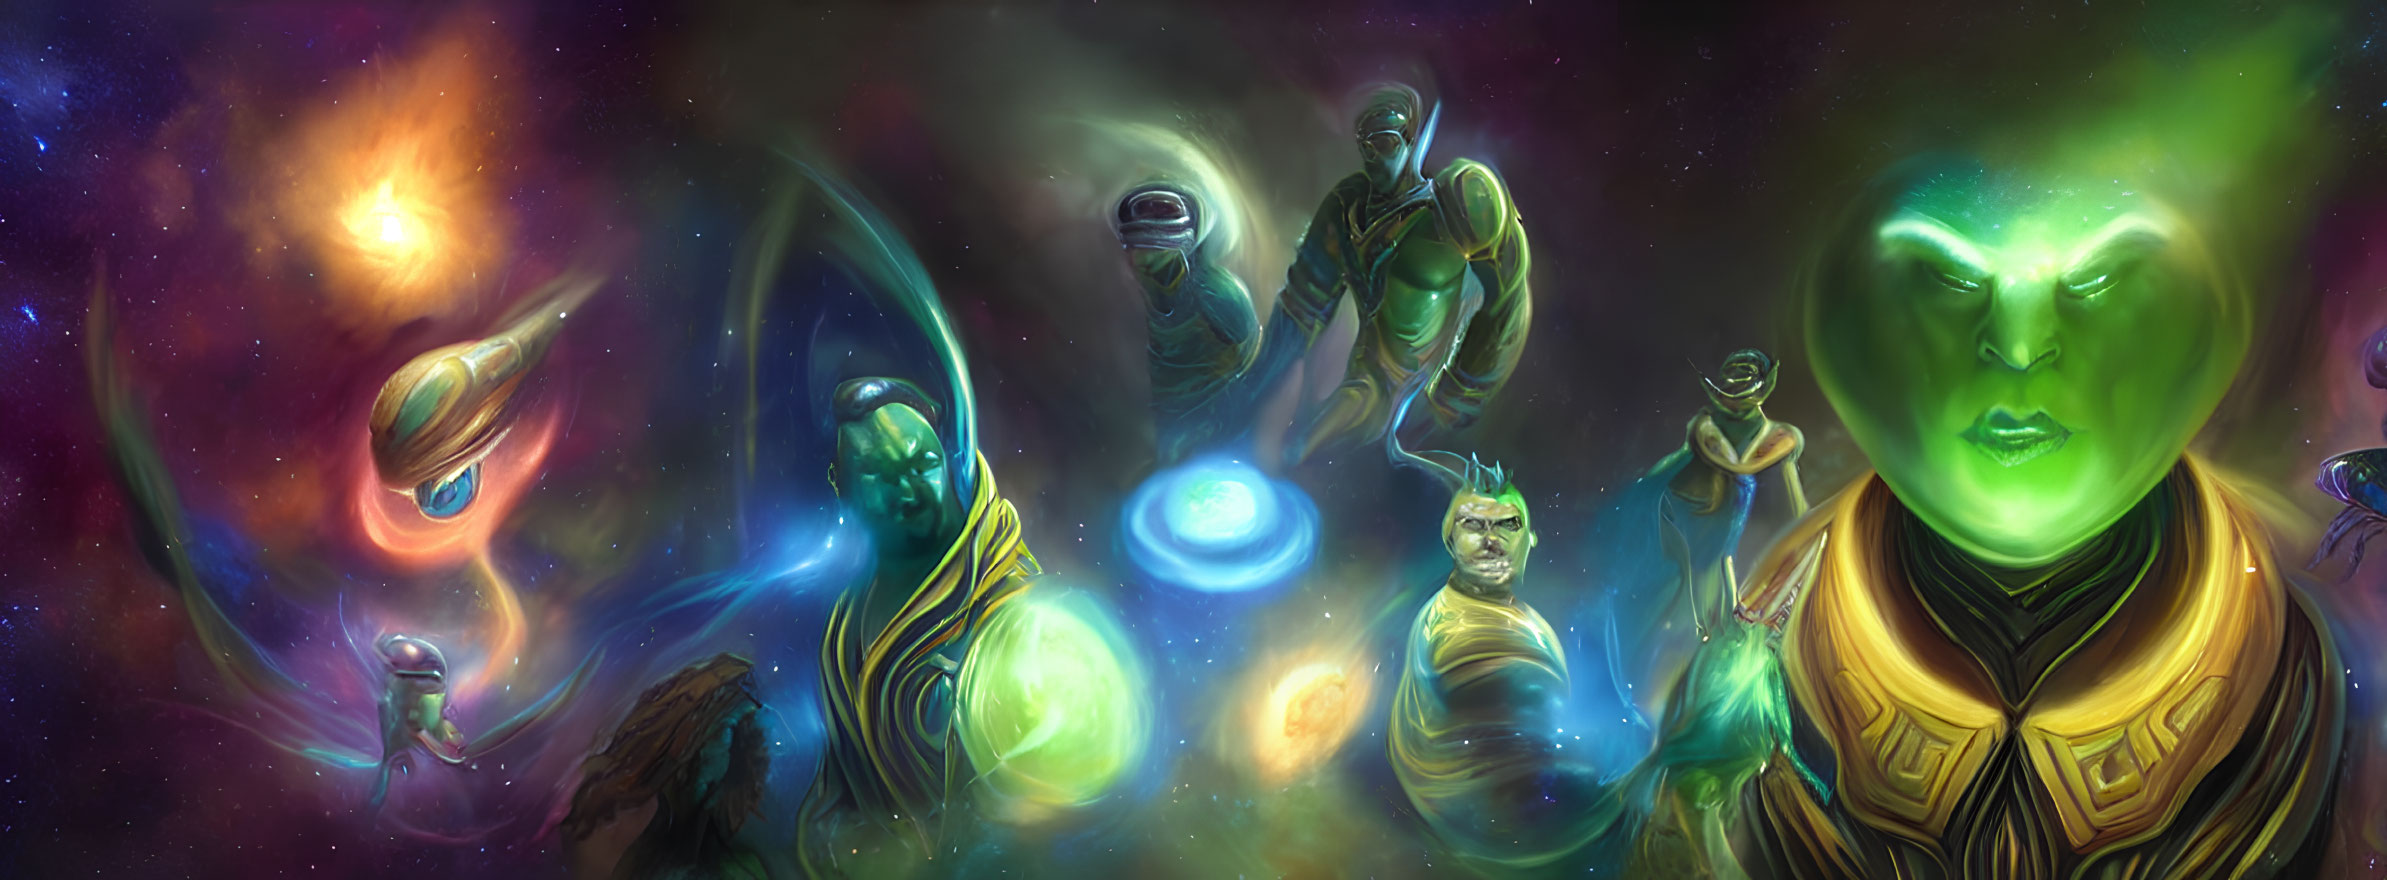 Illustration of cosmic entities with green central figure in starry nebula.